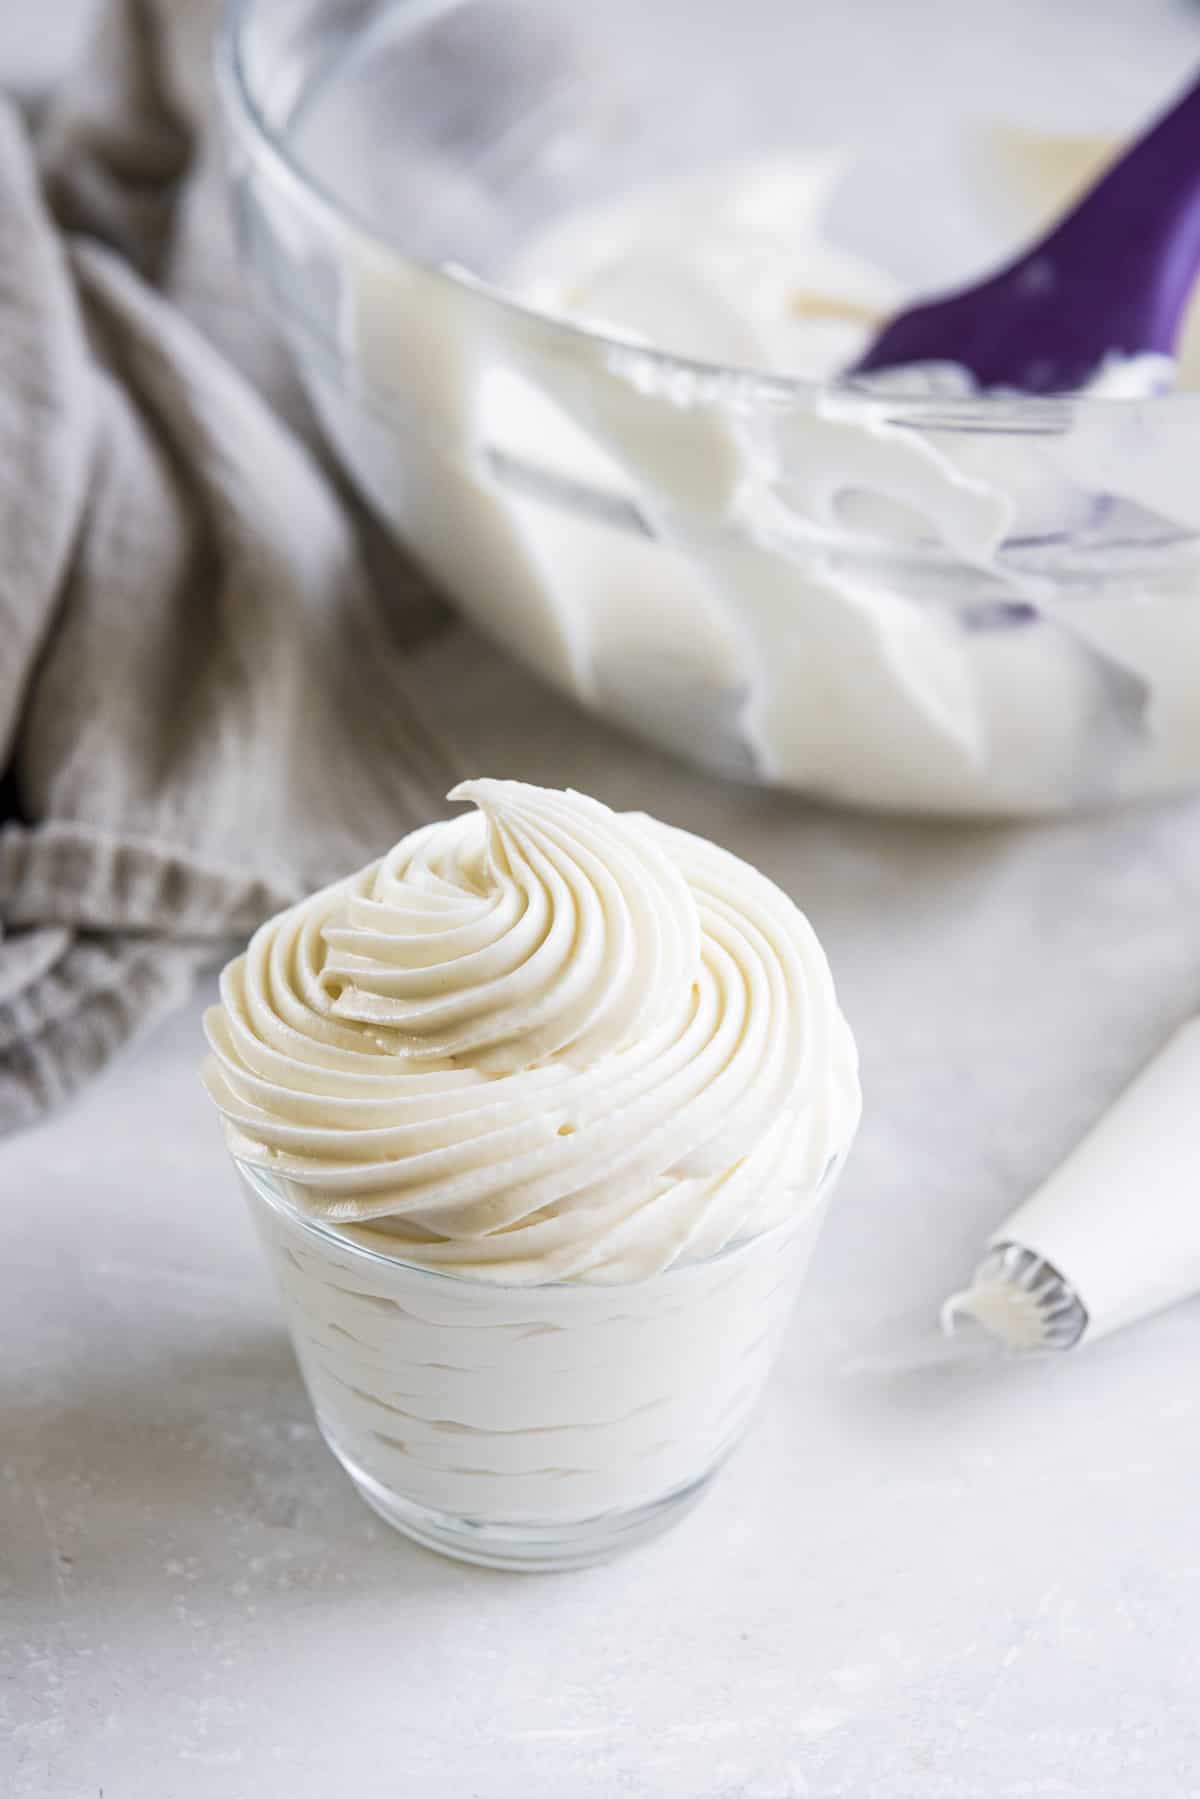 whipped cream cheese frosting piped into a small glass container